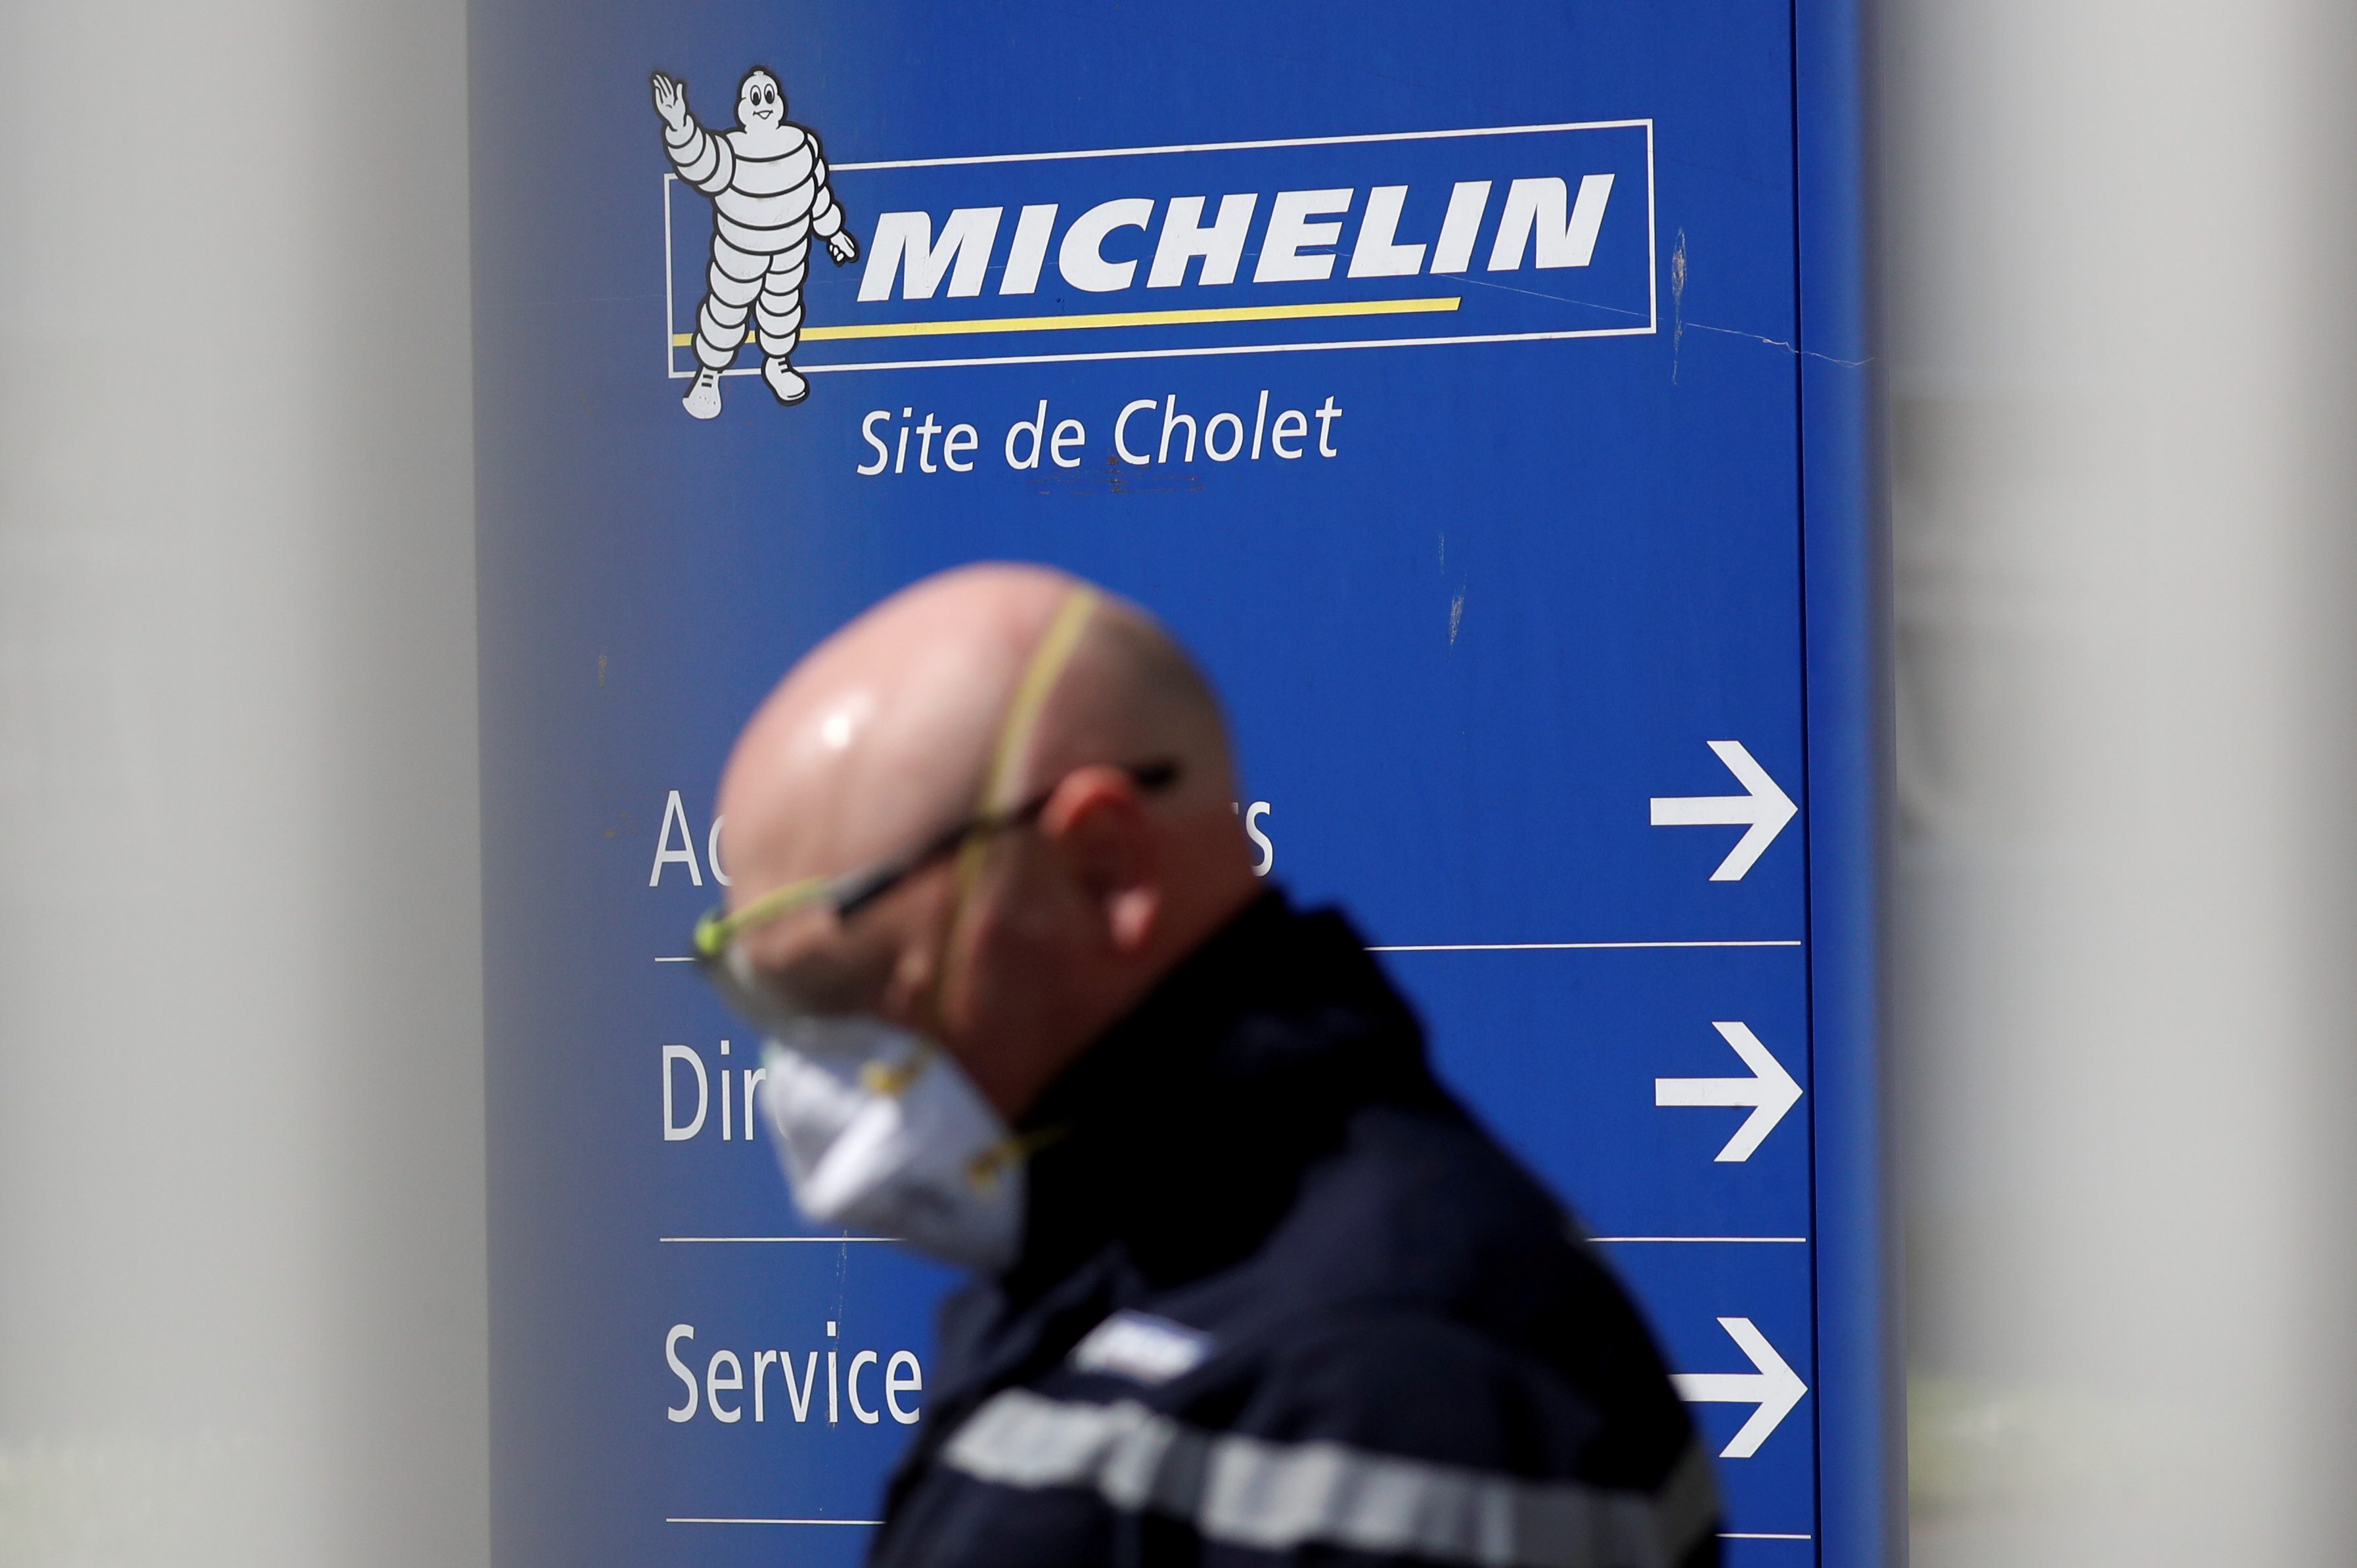 Michelin to cut up to 2,300 jobs over 3 years